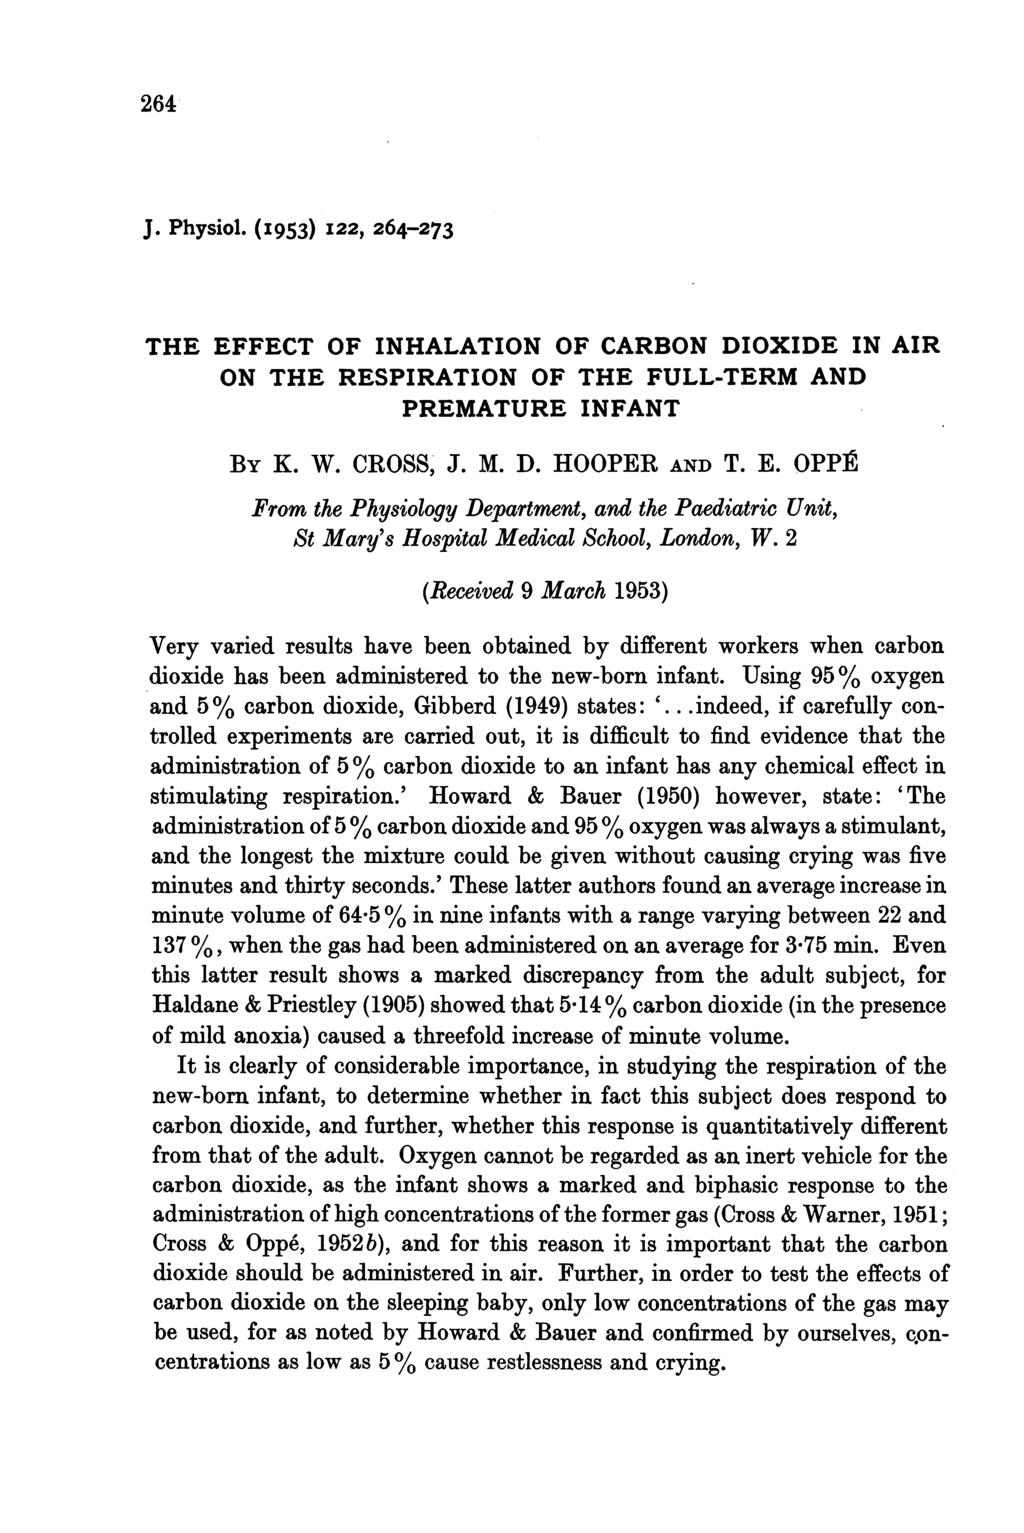 264 J. Physiol. (I953) I22, 264-273 THE EFFECT OF INHALATION OF CARBON DIOXIDE IN AIR ON THE RESPIRATION OF THE FULL-TERM AND PREMATURE INFANT BY K. W. CROSS, J. M. D. HOOPER AND T. E. OPP1R From the Physiology Department, and the Paediatric Unit, St Mary's Hospital Medical School, London, W.